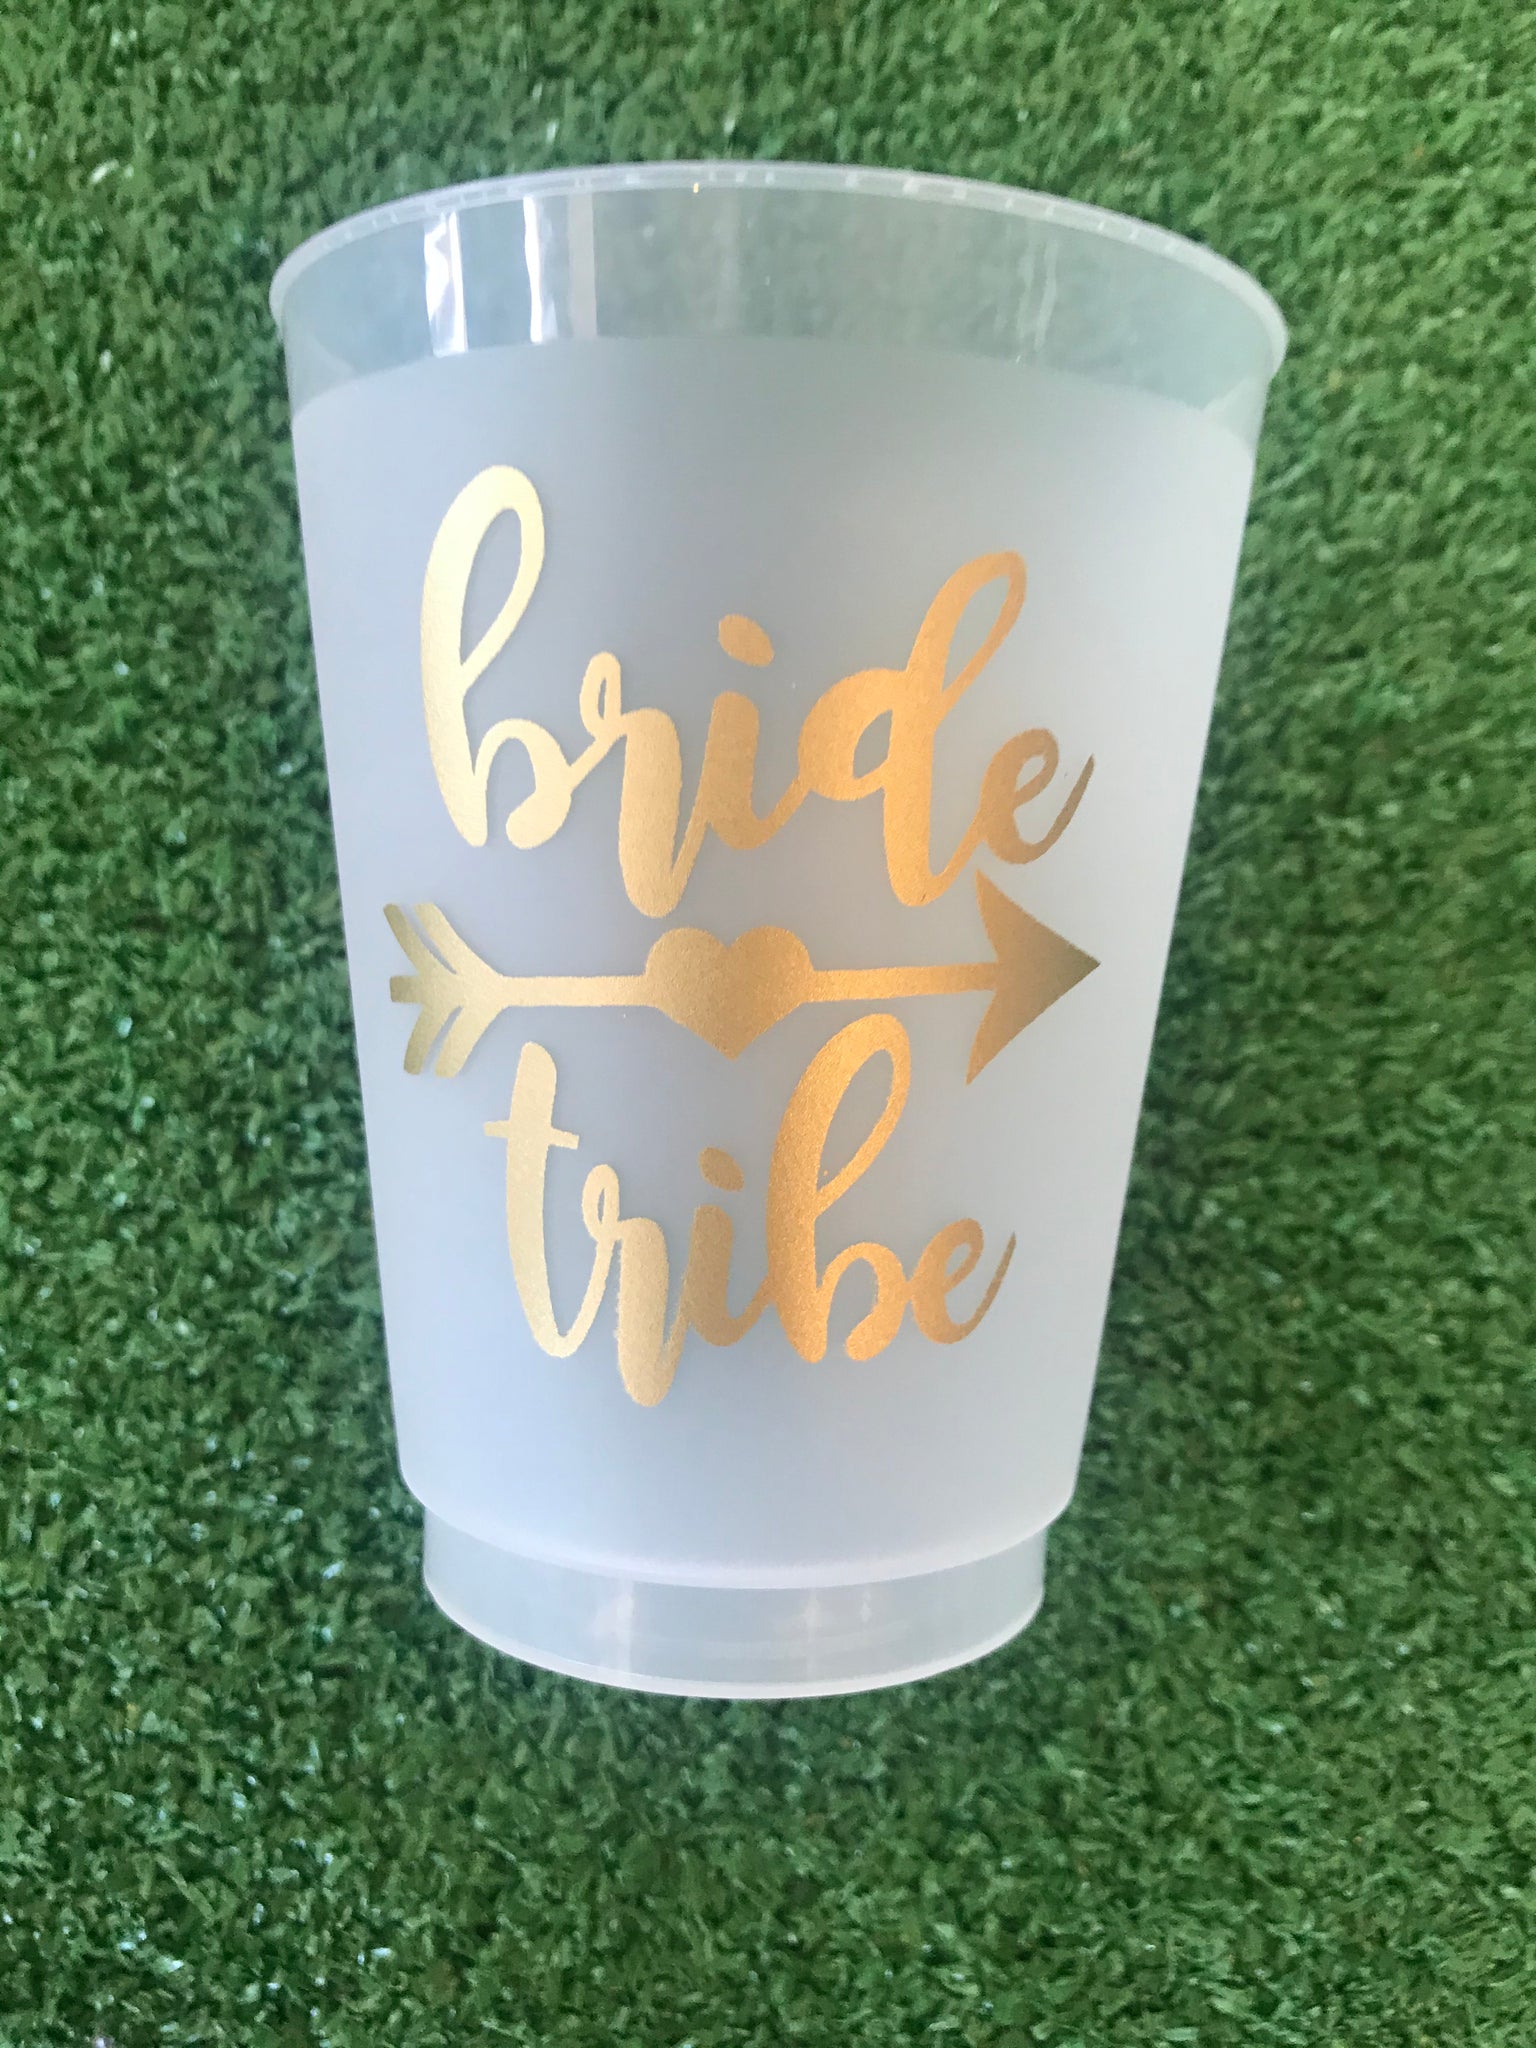 Frost Flex Bride Tribe Cups